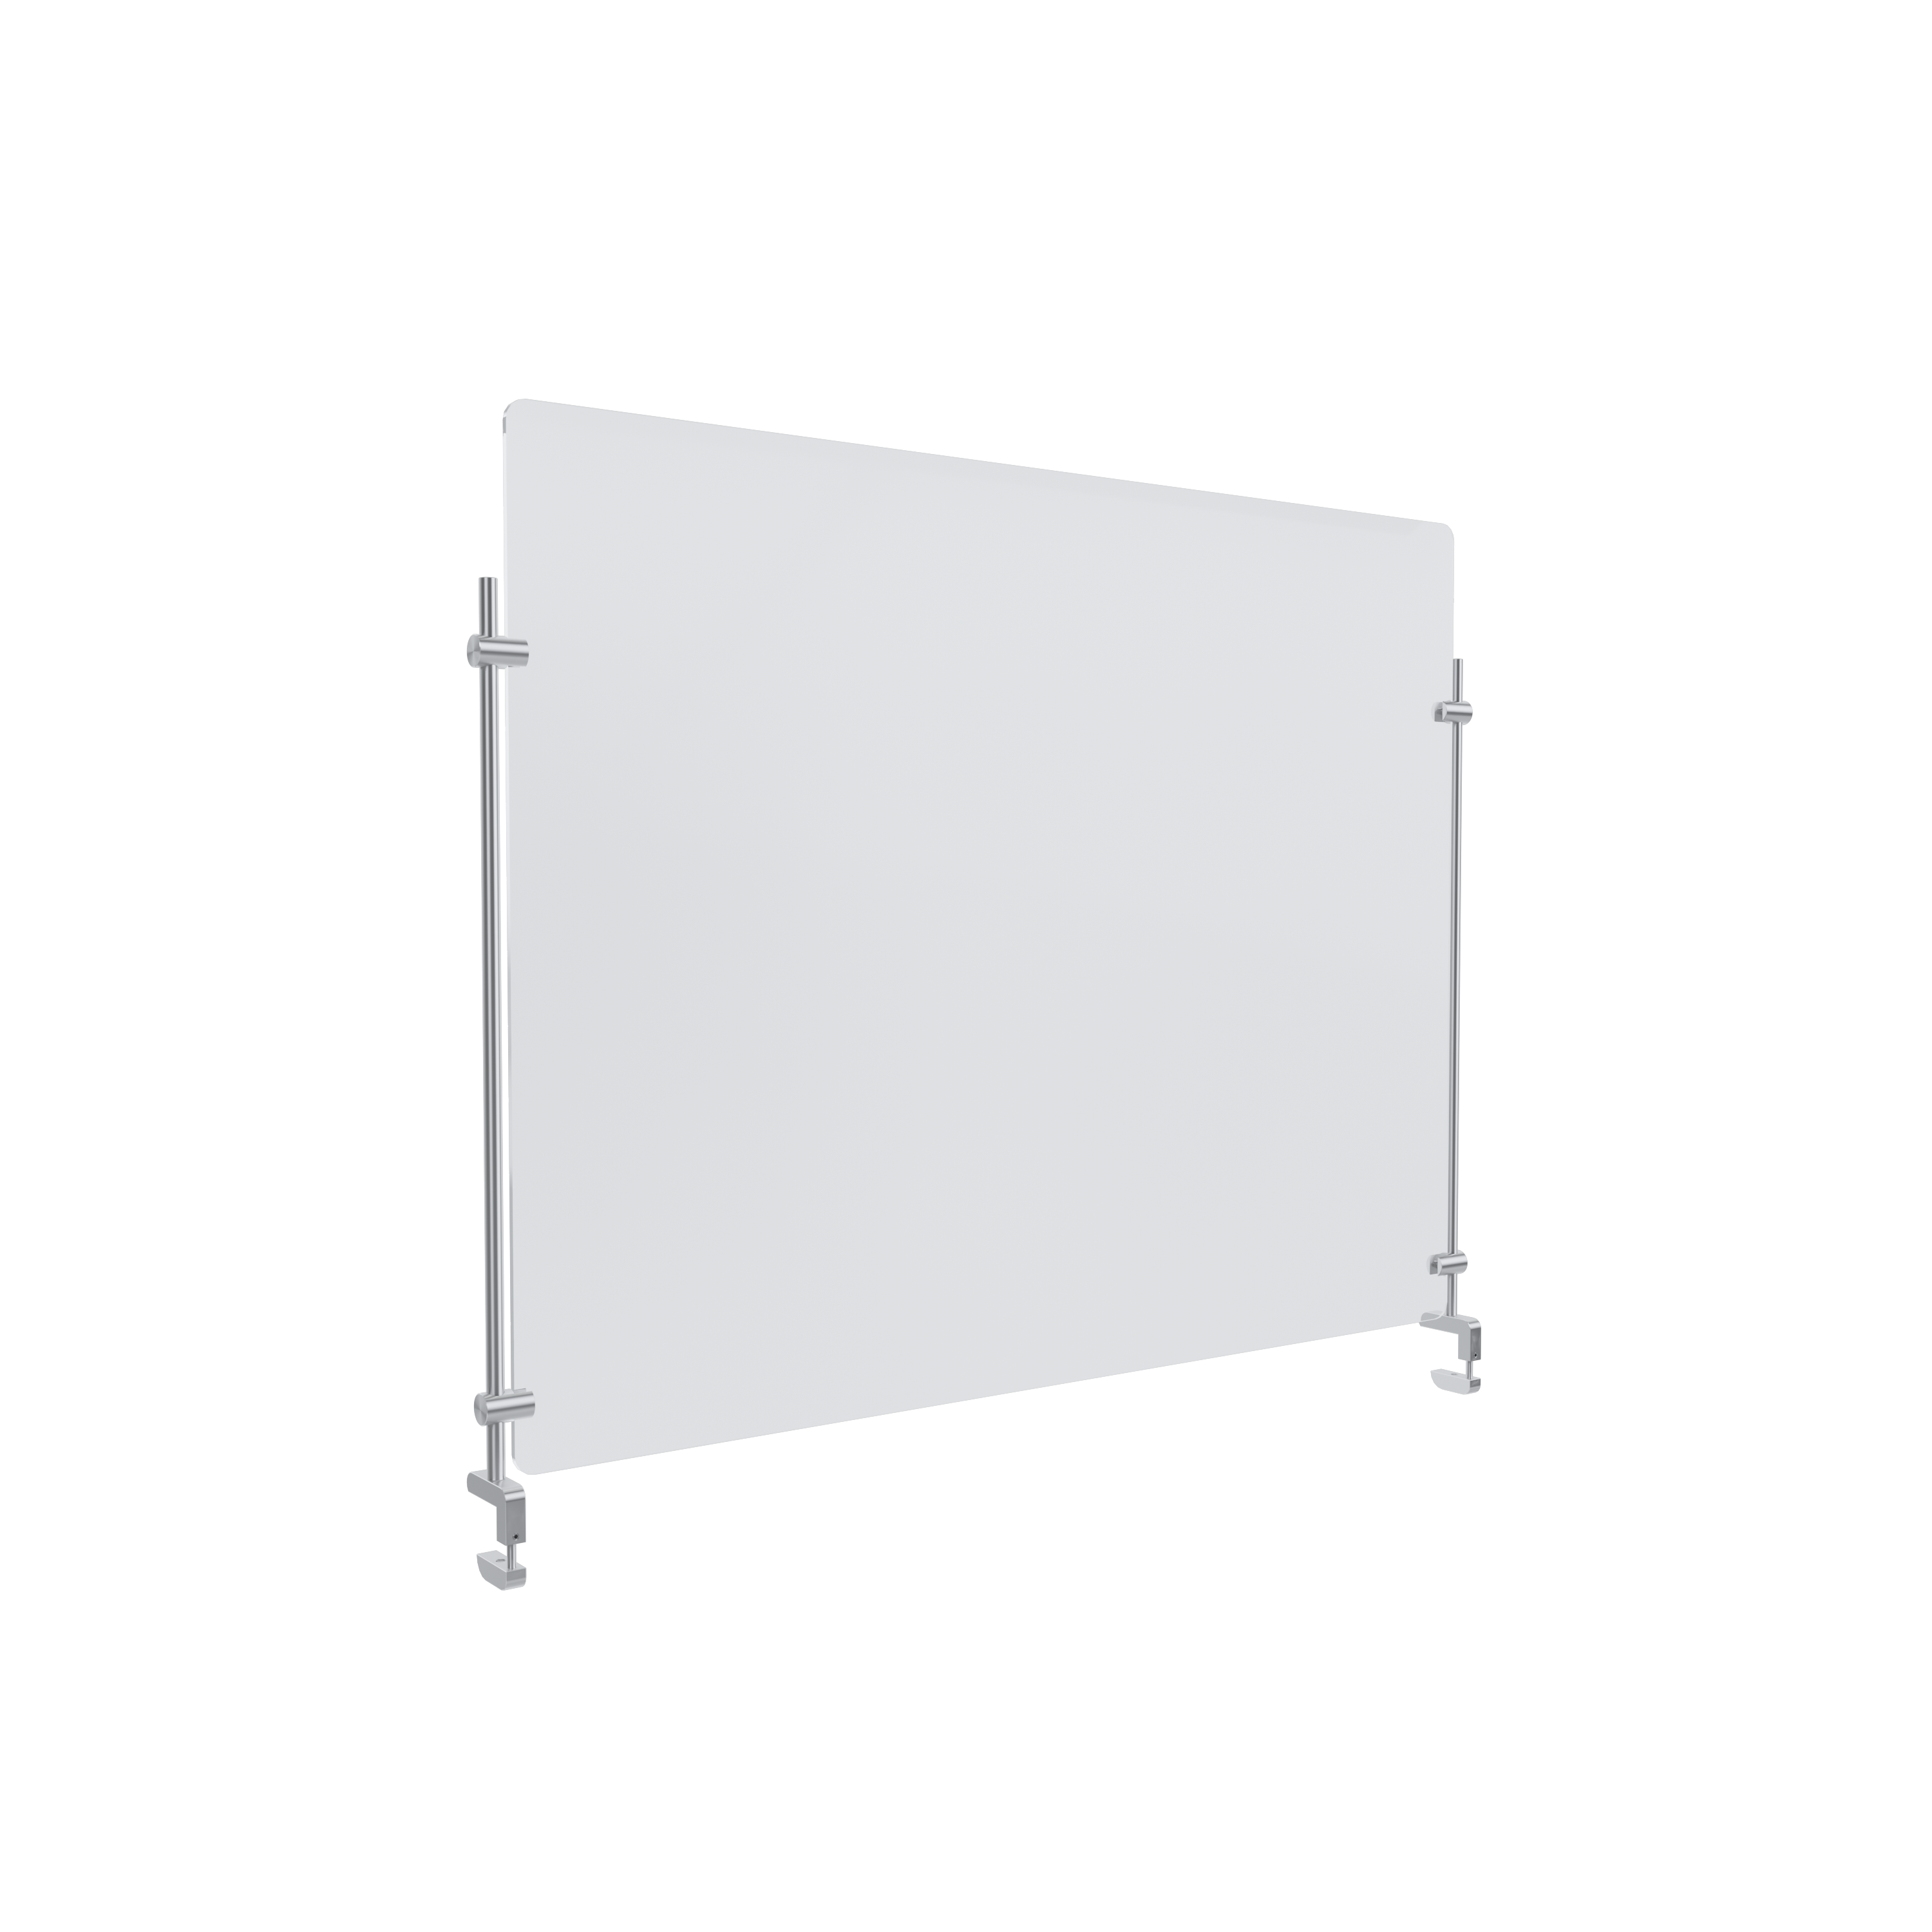 Clear Acrylic Sneeze Guard 30'' Wide x 23-1/2'' Tall, with (2) 20'' Tall x 3/8'' Diameter Clear Anodized Aluminum Rod with Counter Clamps (Clamp Material Accepted 3/4'' to 1-1/2'')